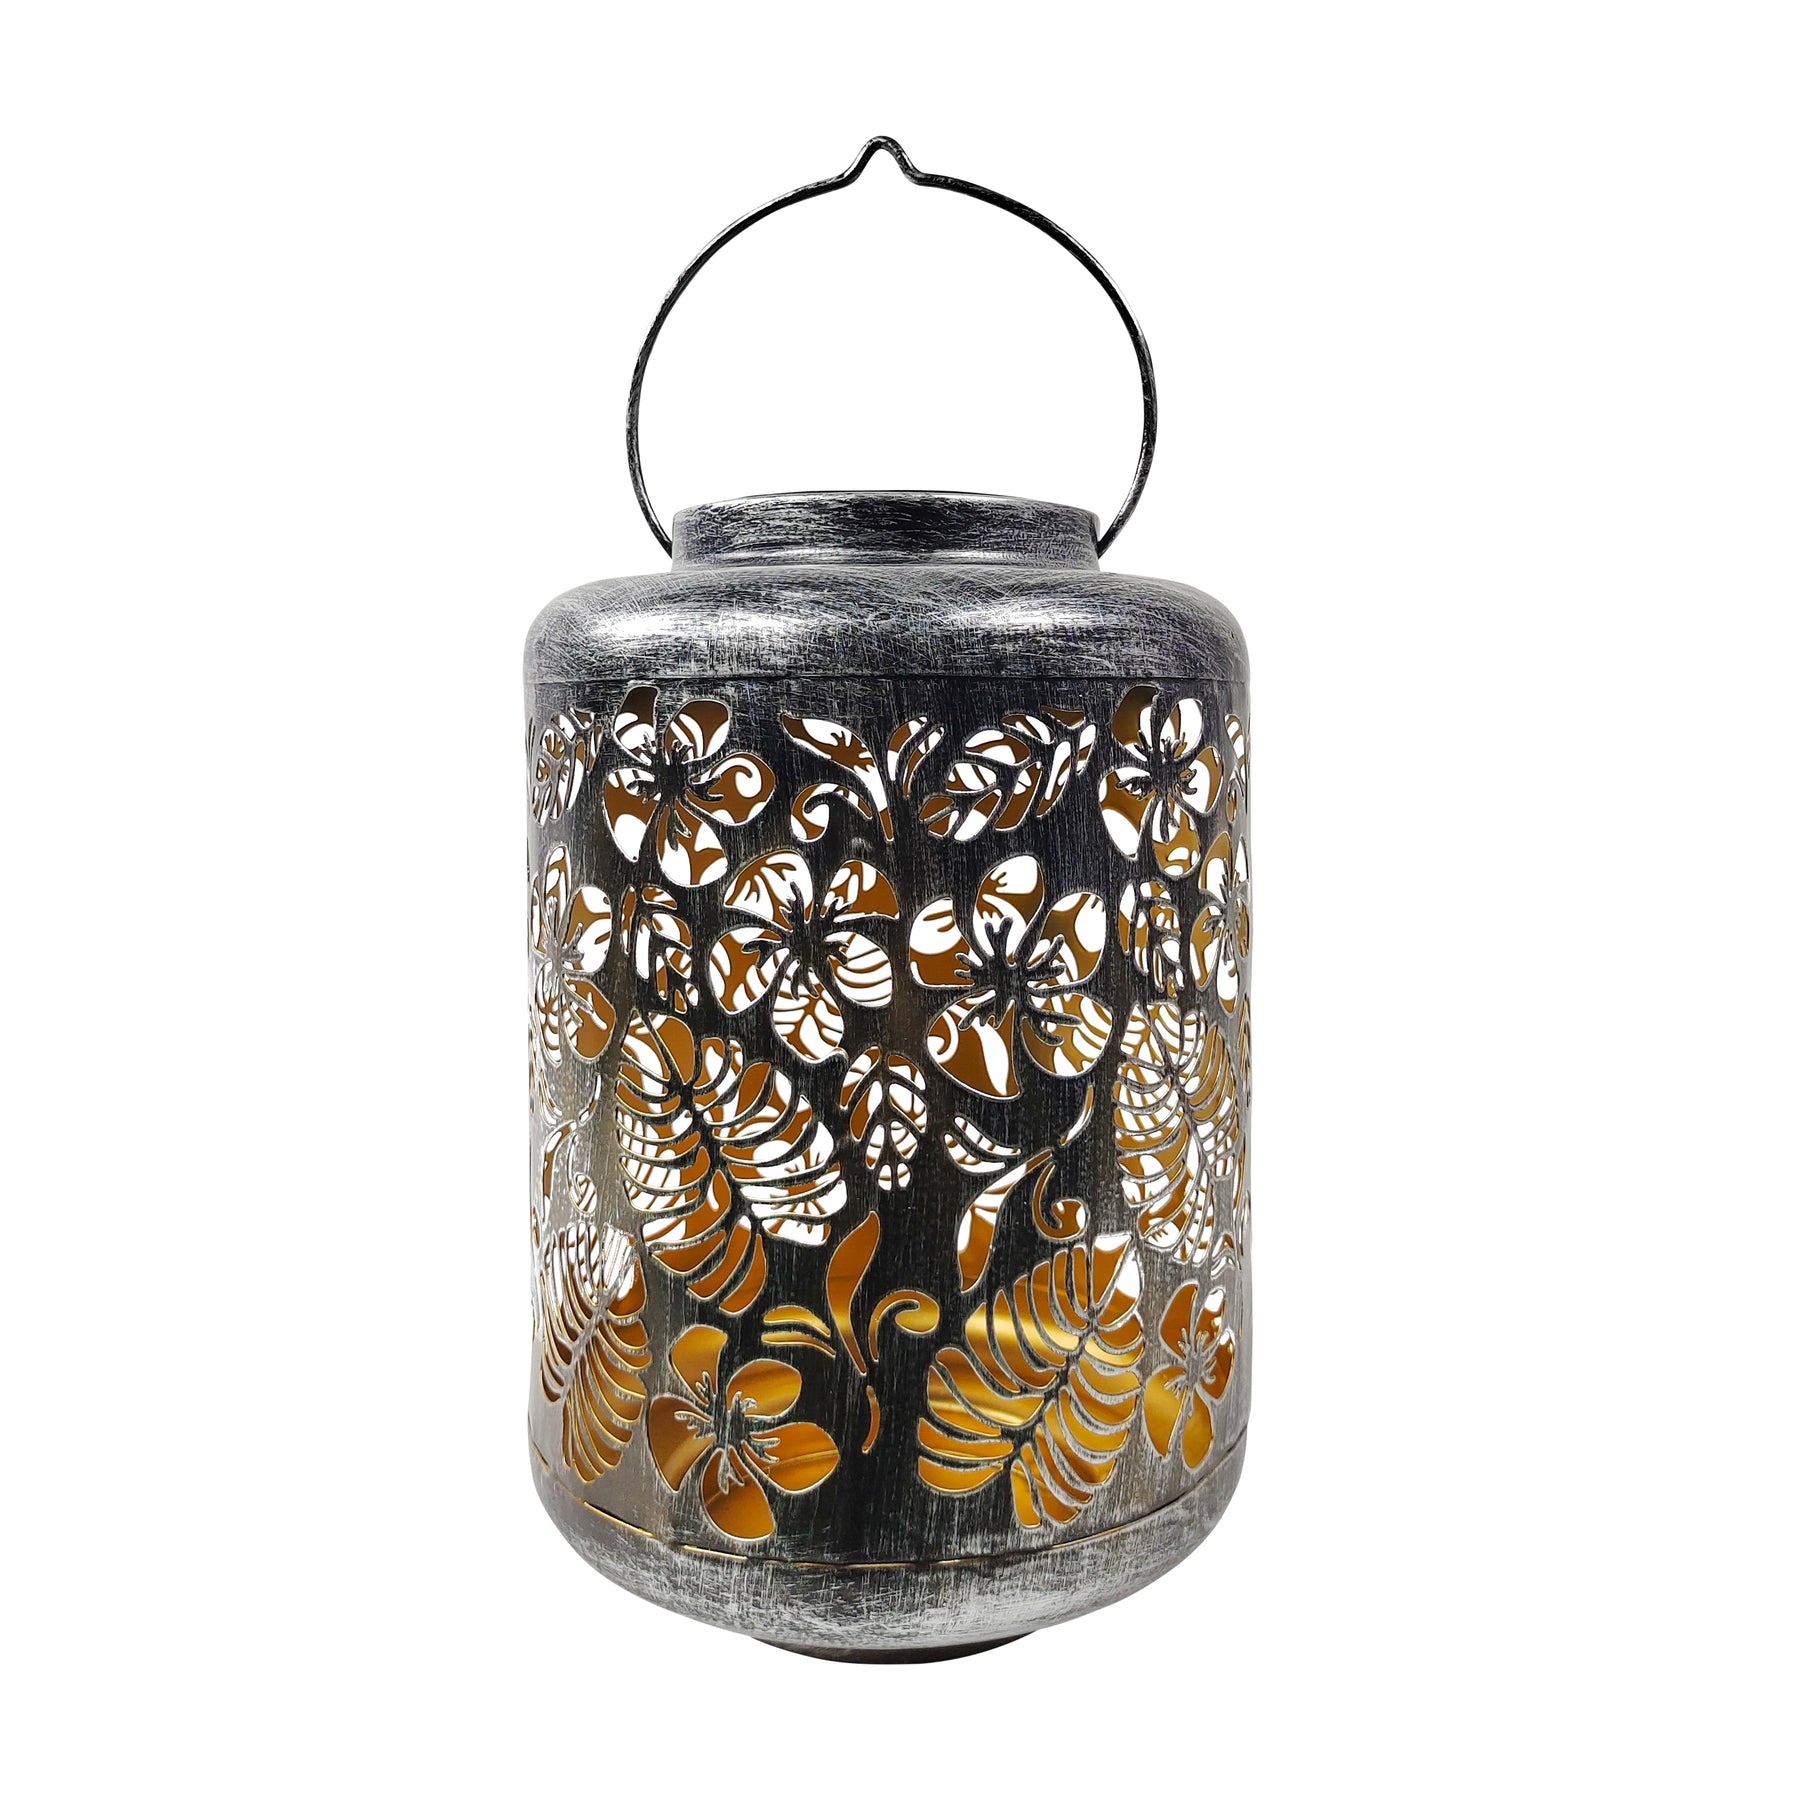 Bliss Outdoors 12-inch Tall Hanging and Tabletop Decorative Solar LED Lantern with Unique Tropical Flower Design and Antique Hand Painted Finish in the brushed silver variation.